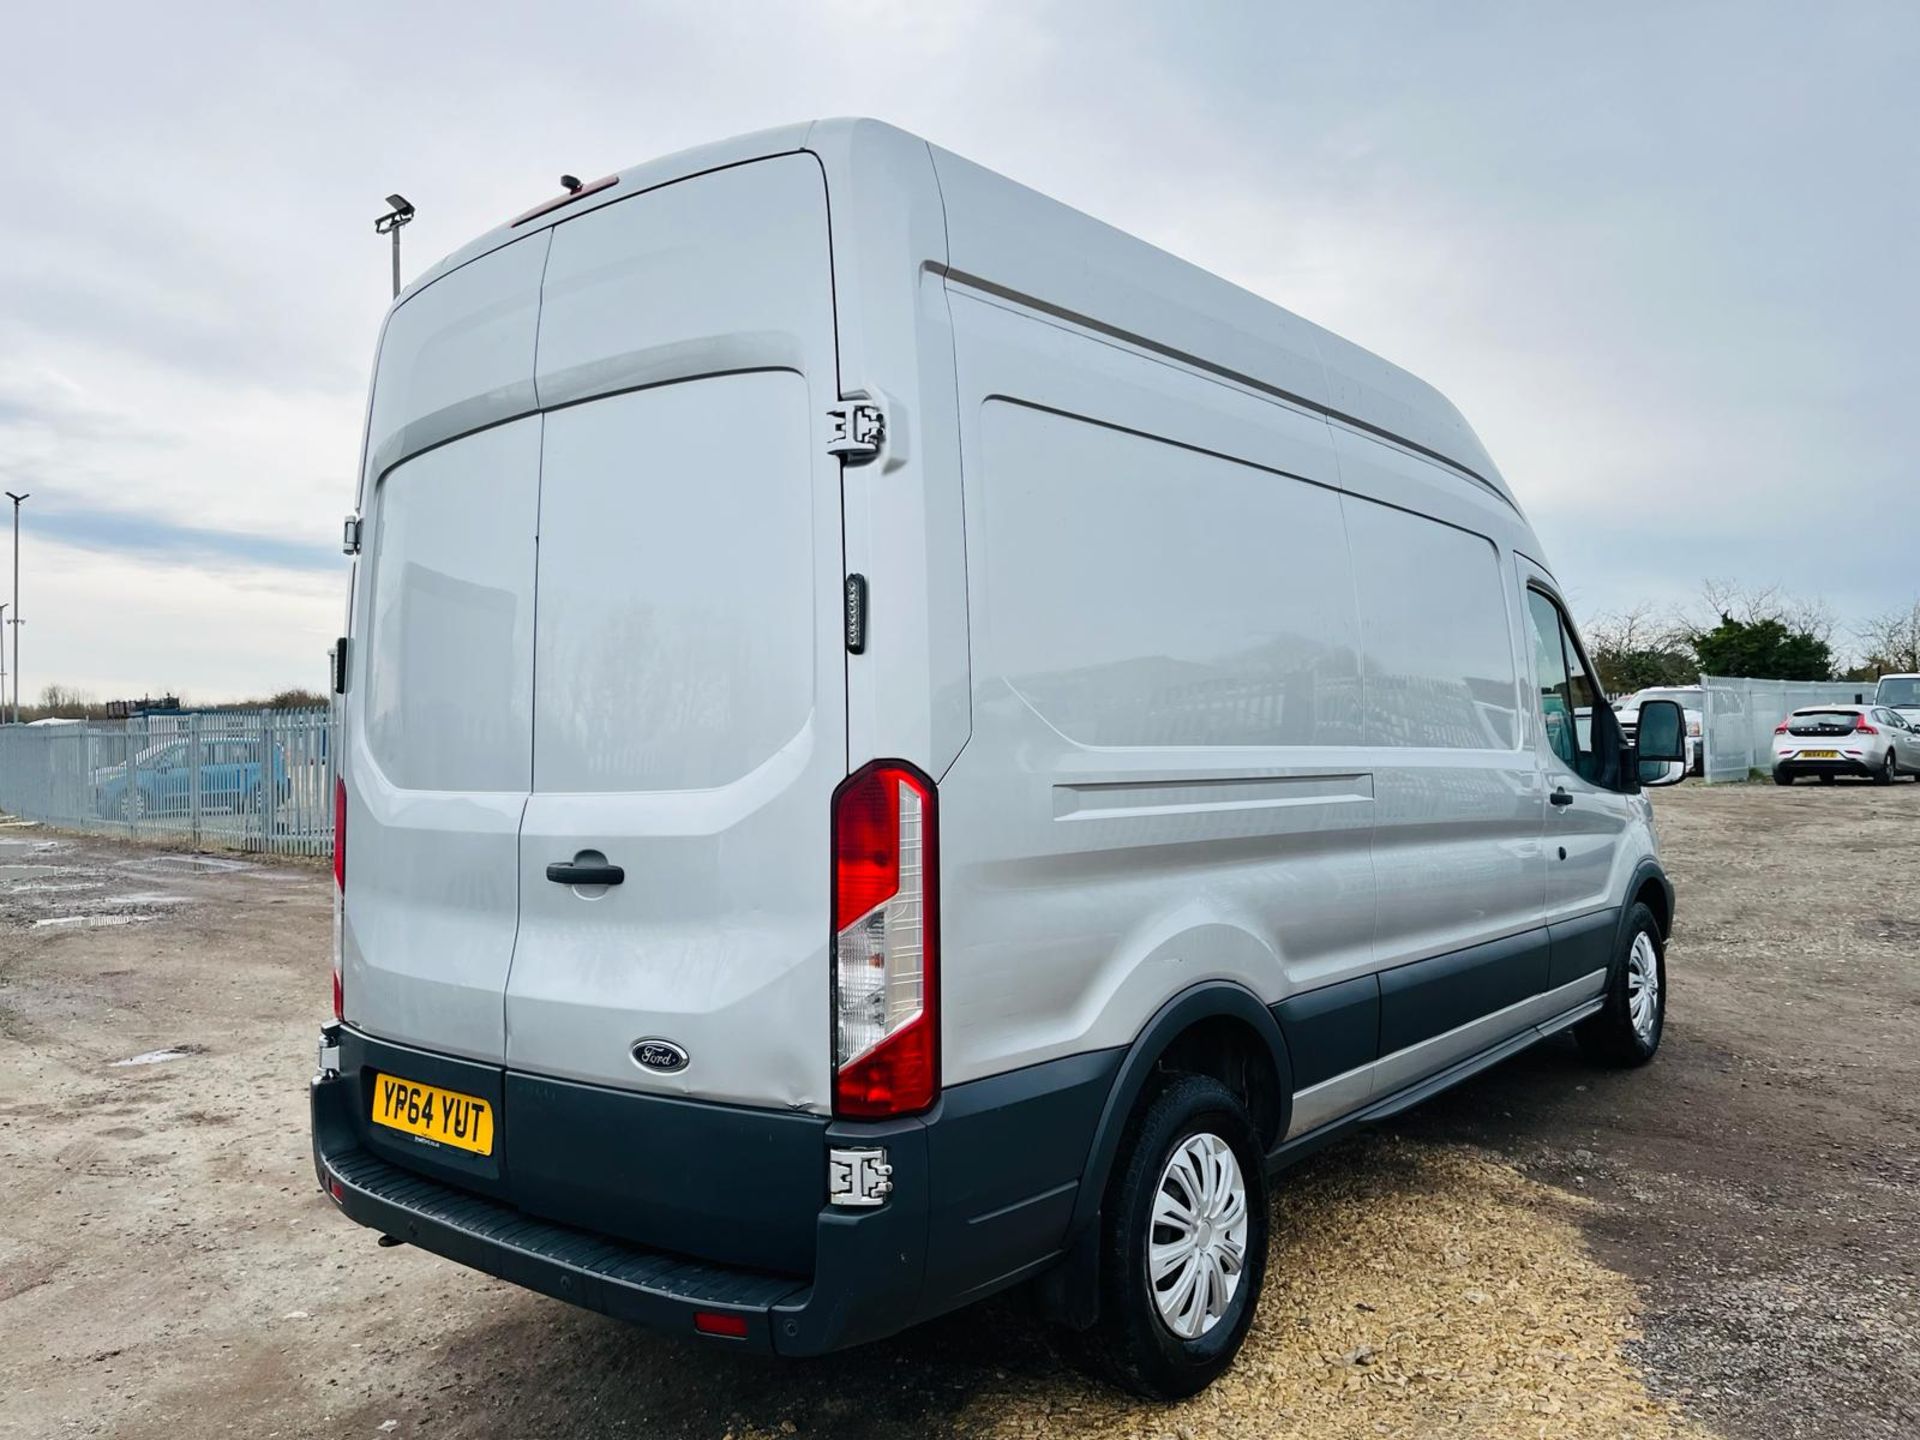 Ford Transit Trend 350 TDCI 125 2.2 L3 H3 2014 '64 Reg' - Parking sensors - Air Conditioning - Image 12 of 27